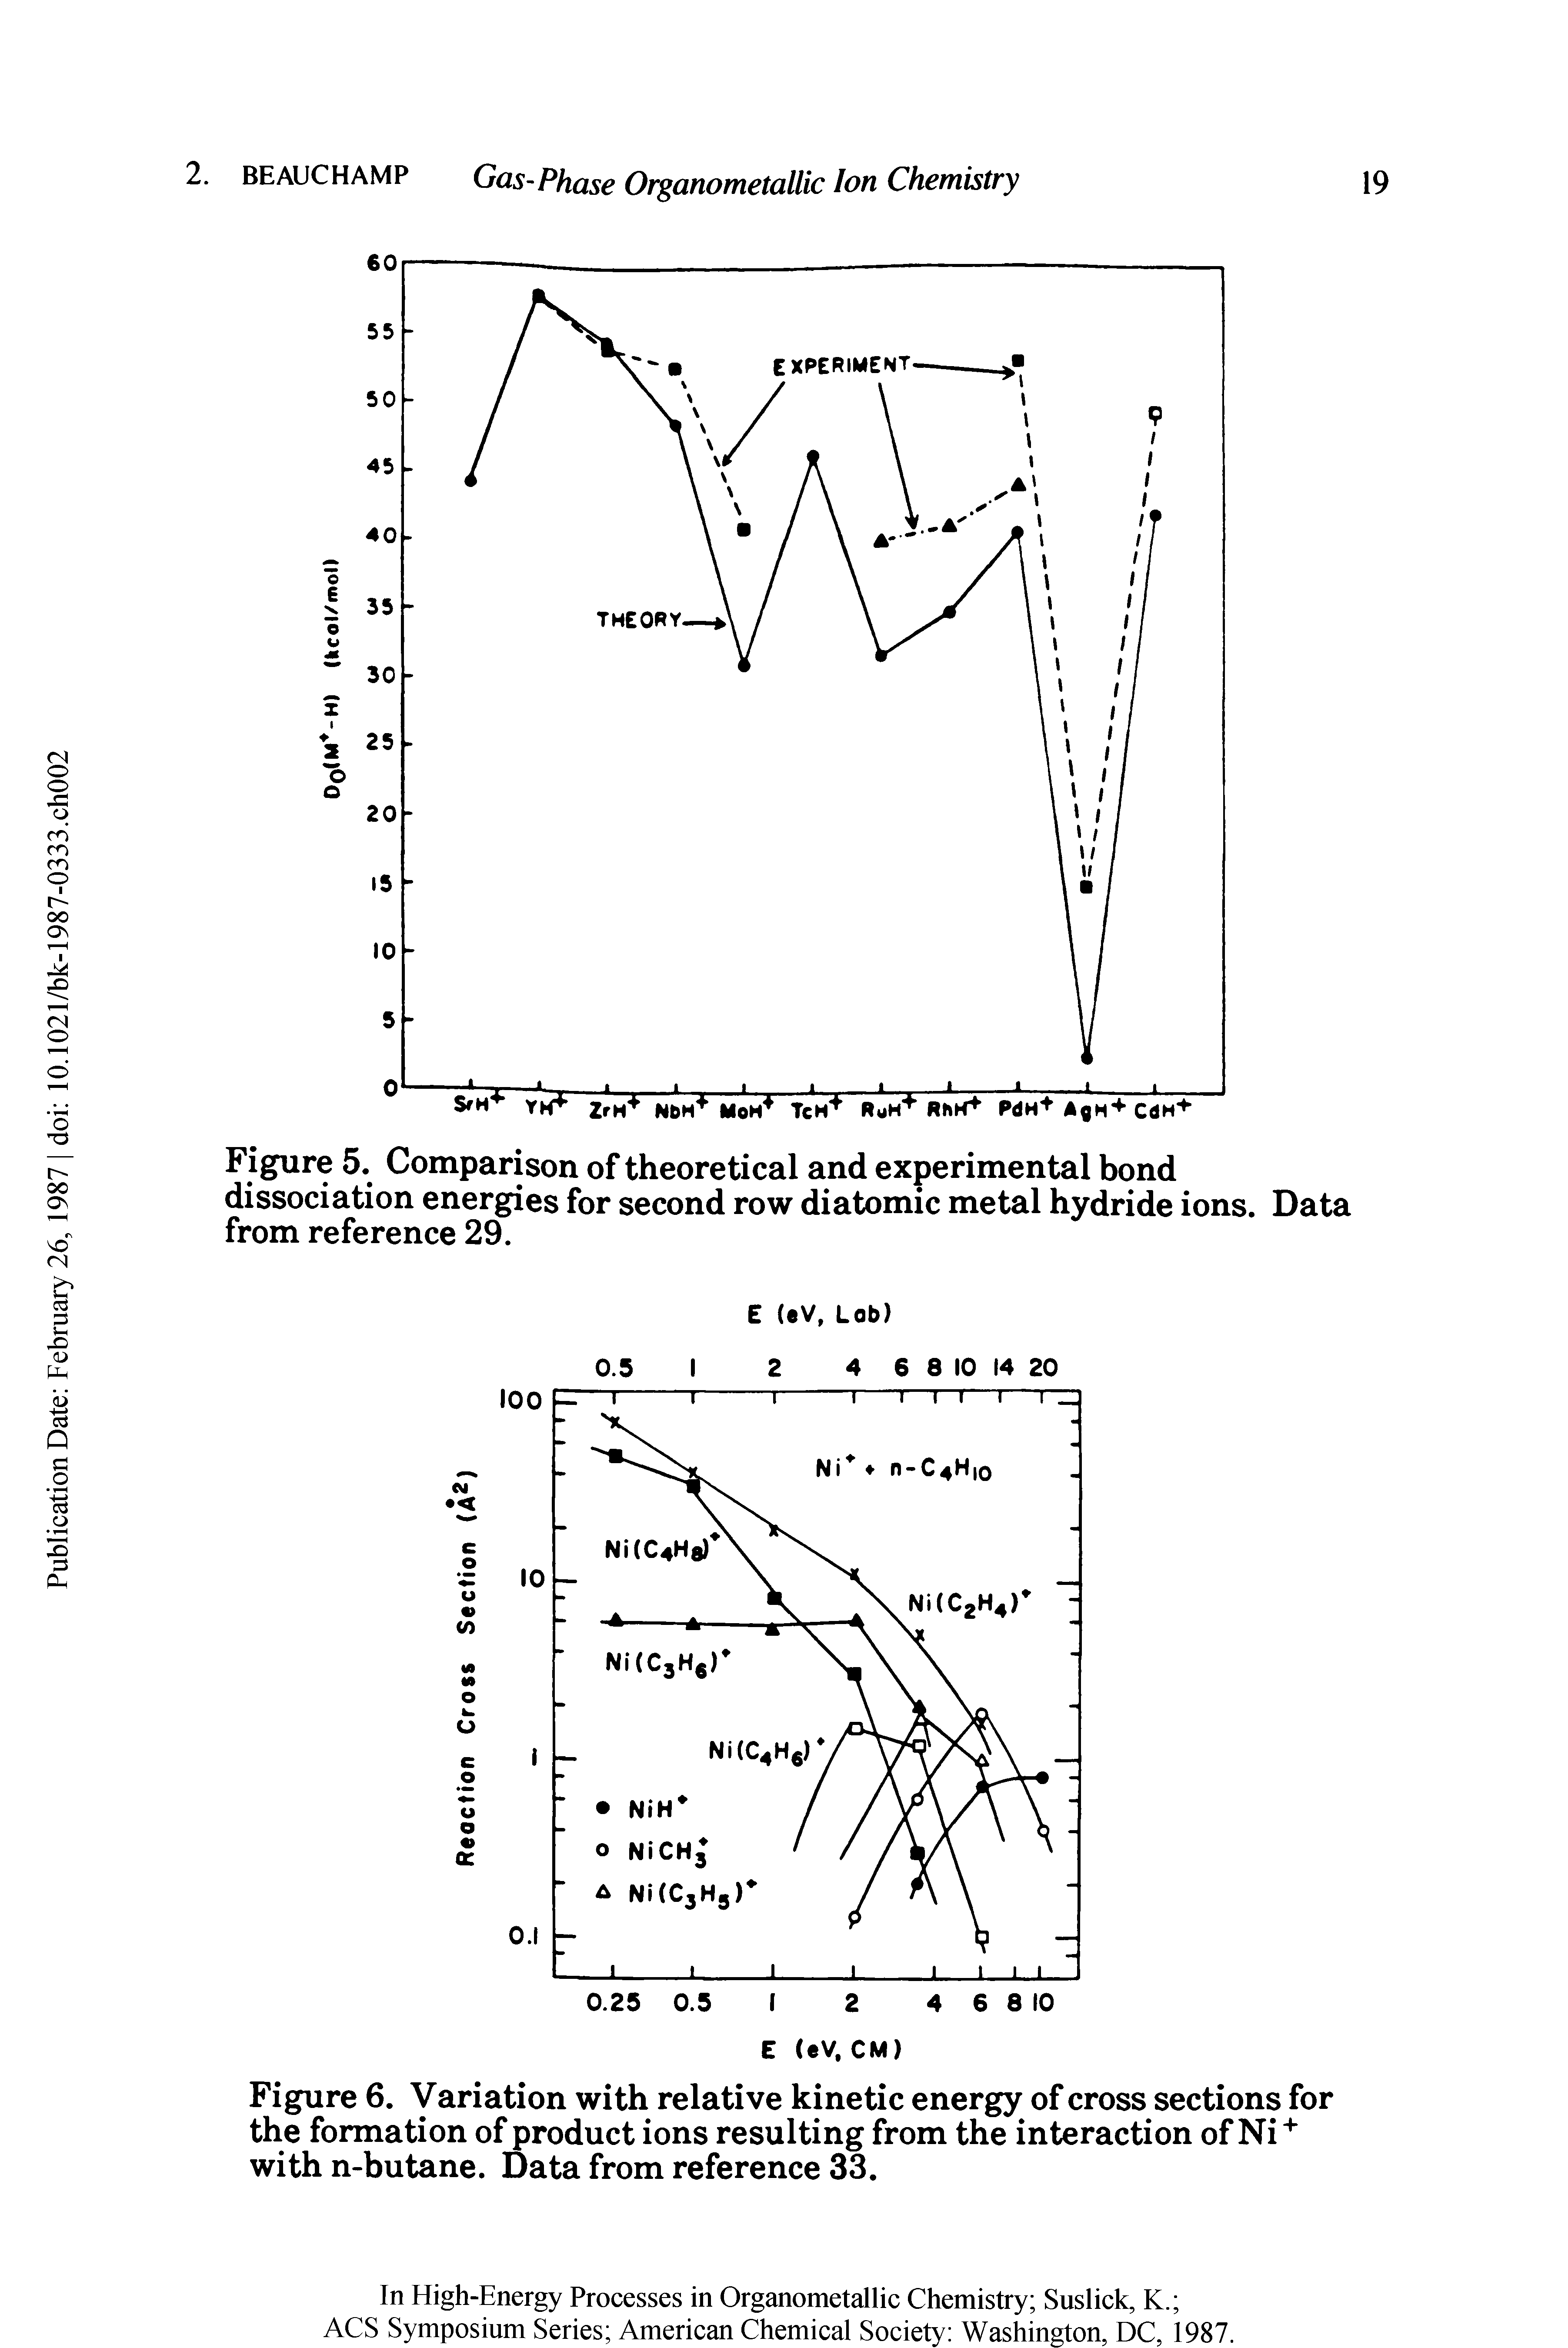 Figure 6. Variation with relative kinetic energy of cross sections for the formation of product ions resulting from the interaction of Ni + with n-butane. Data from reference 33.